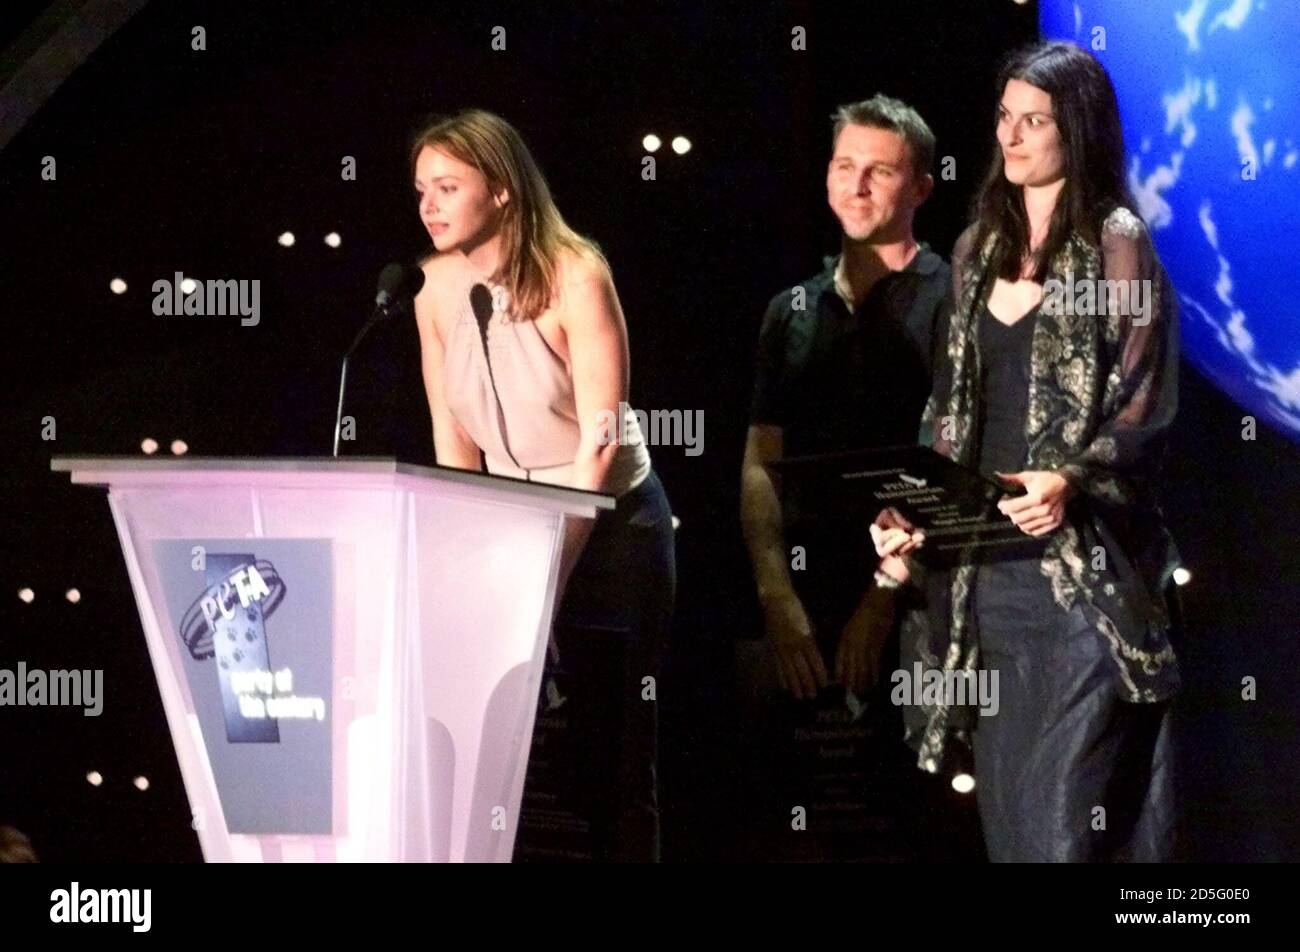 Fashion designer Stella McCartney (at podium) accepts an award for her work on behalf of animal rights along with fellow fashion designer Todd Oldham (C) and model Magali Amadei (R) at the People for the Ethical Treatment of Animals (PETA) Party of the Century and Humanitarian Awards September 18 at Paramount Studios in Hollywood.  [Paul McCartney presented the first Linda McCartney Memorial Award to Pamela Aderson Lee] as a special tribute to his late wife, who fought for animal rights. **DIGITAL IMAGE** Stock Photo